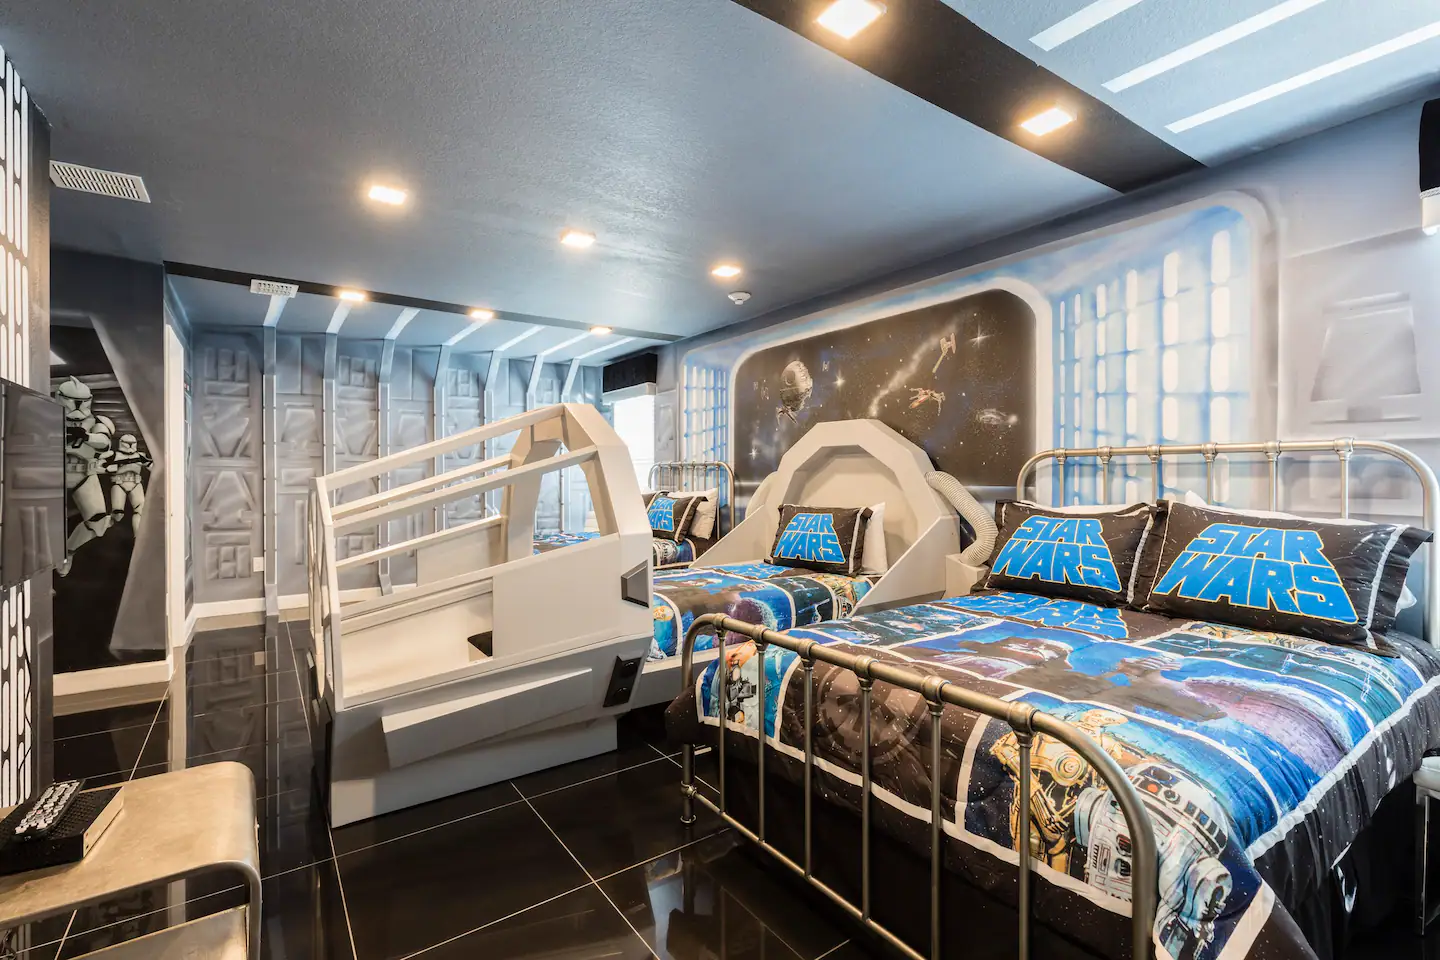 Another Star-Wars themed Bedroom with a unique Custom "Millennium Falcon" Bed